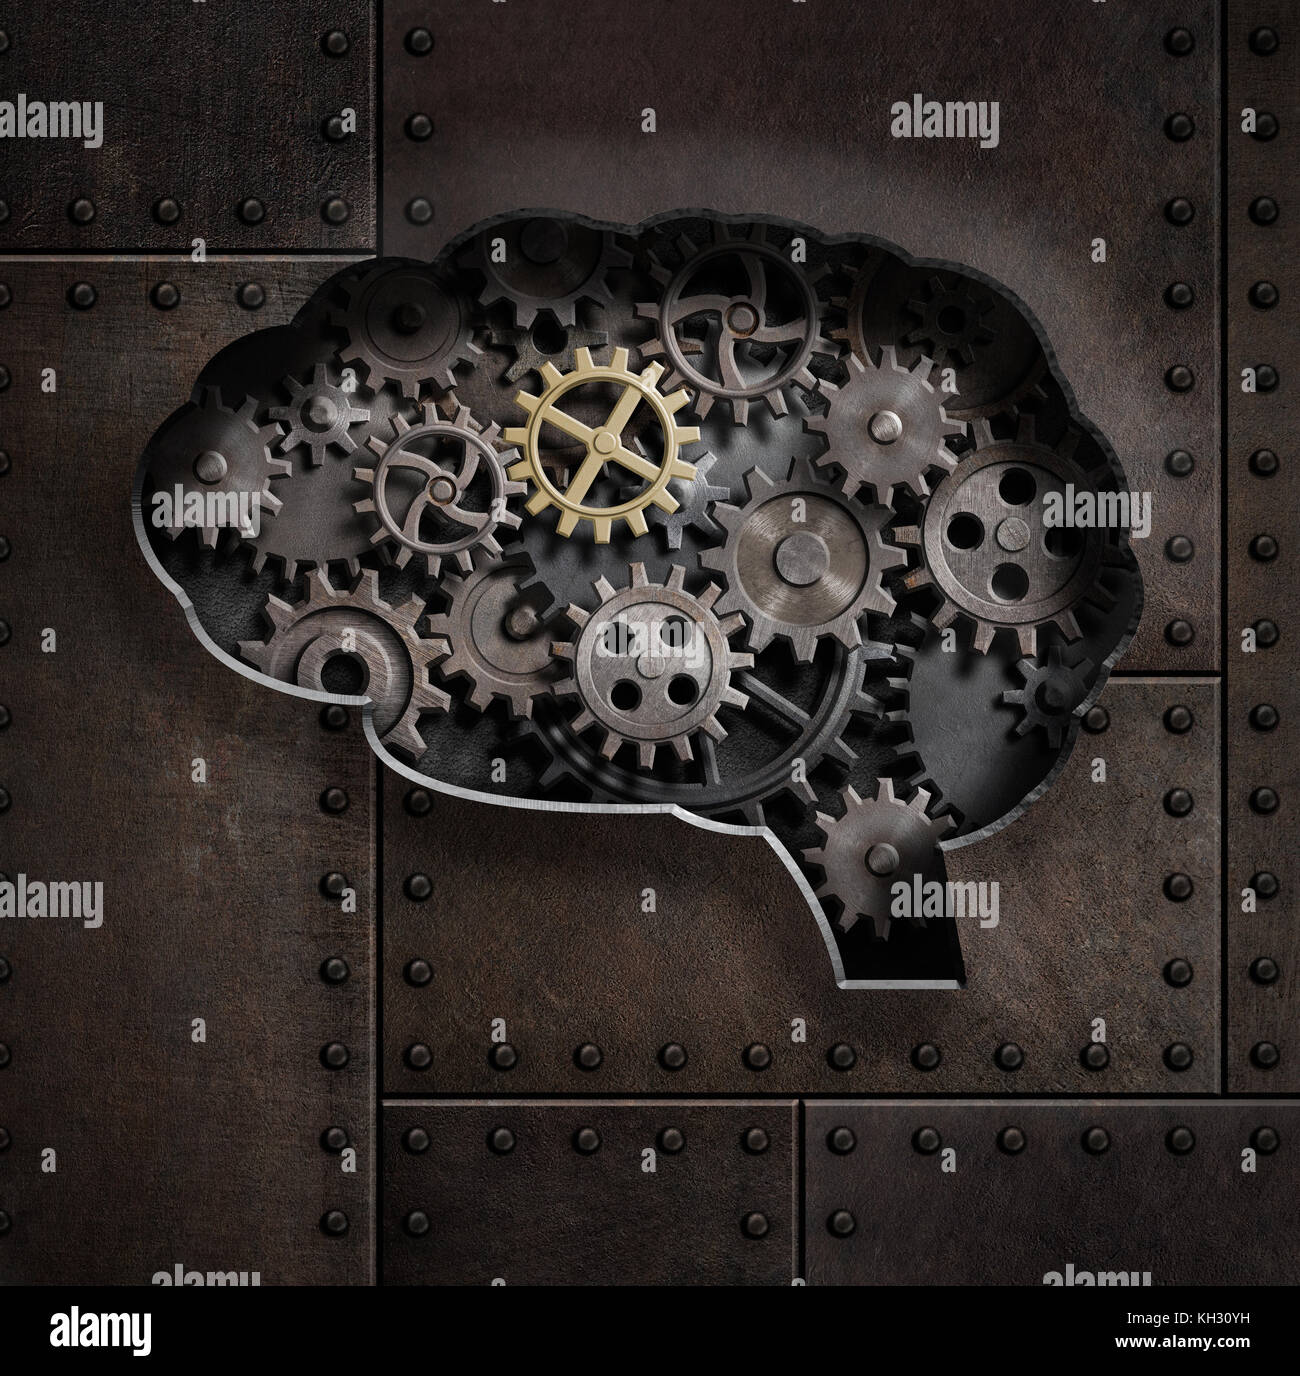 Brain gears and cogs concept 3d illustration Stock Photo